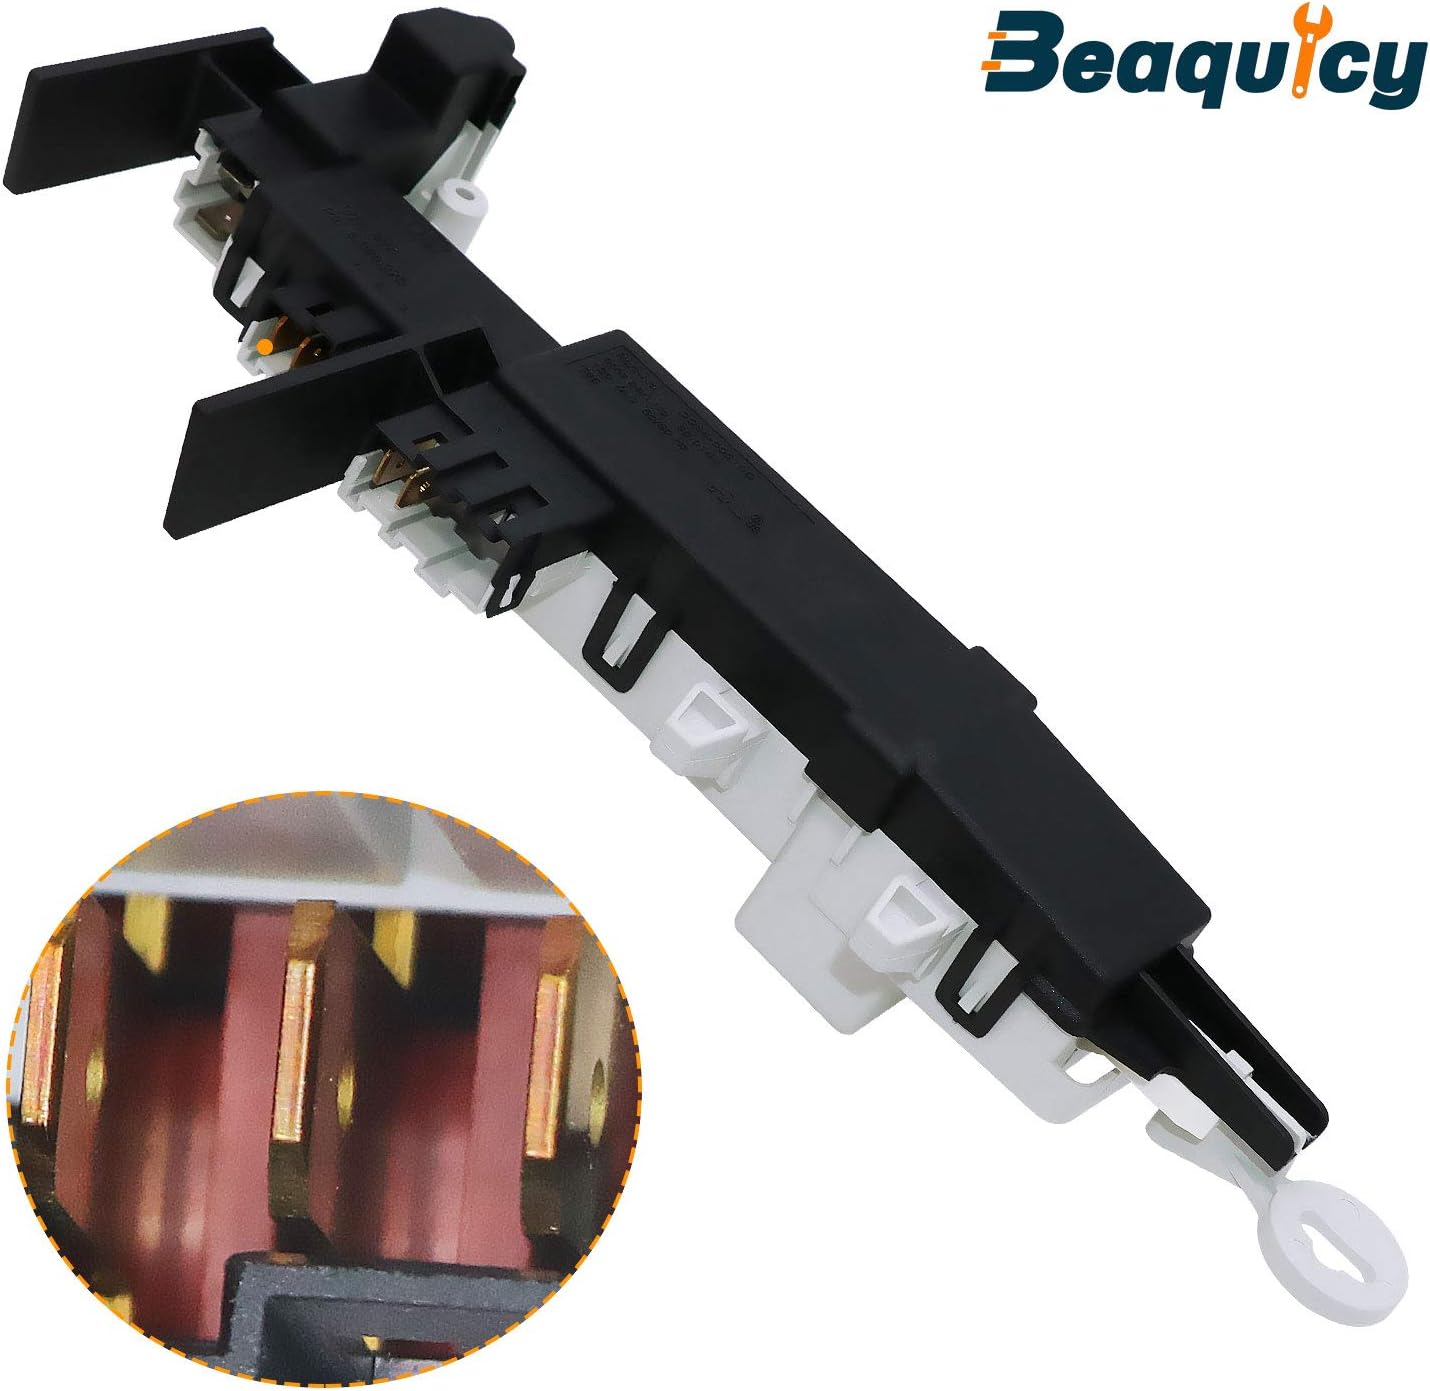 Beaquicy DC64-00519B Washer Door Lock Switch Assembly GENUINE Part - Replacement for Samsung Washer - OEM Original Washing Machine Door